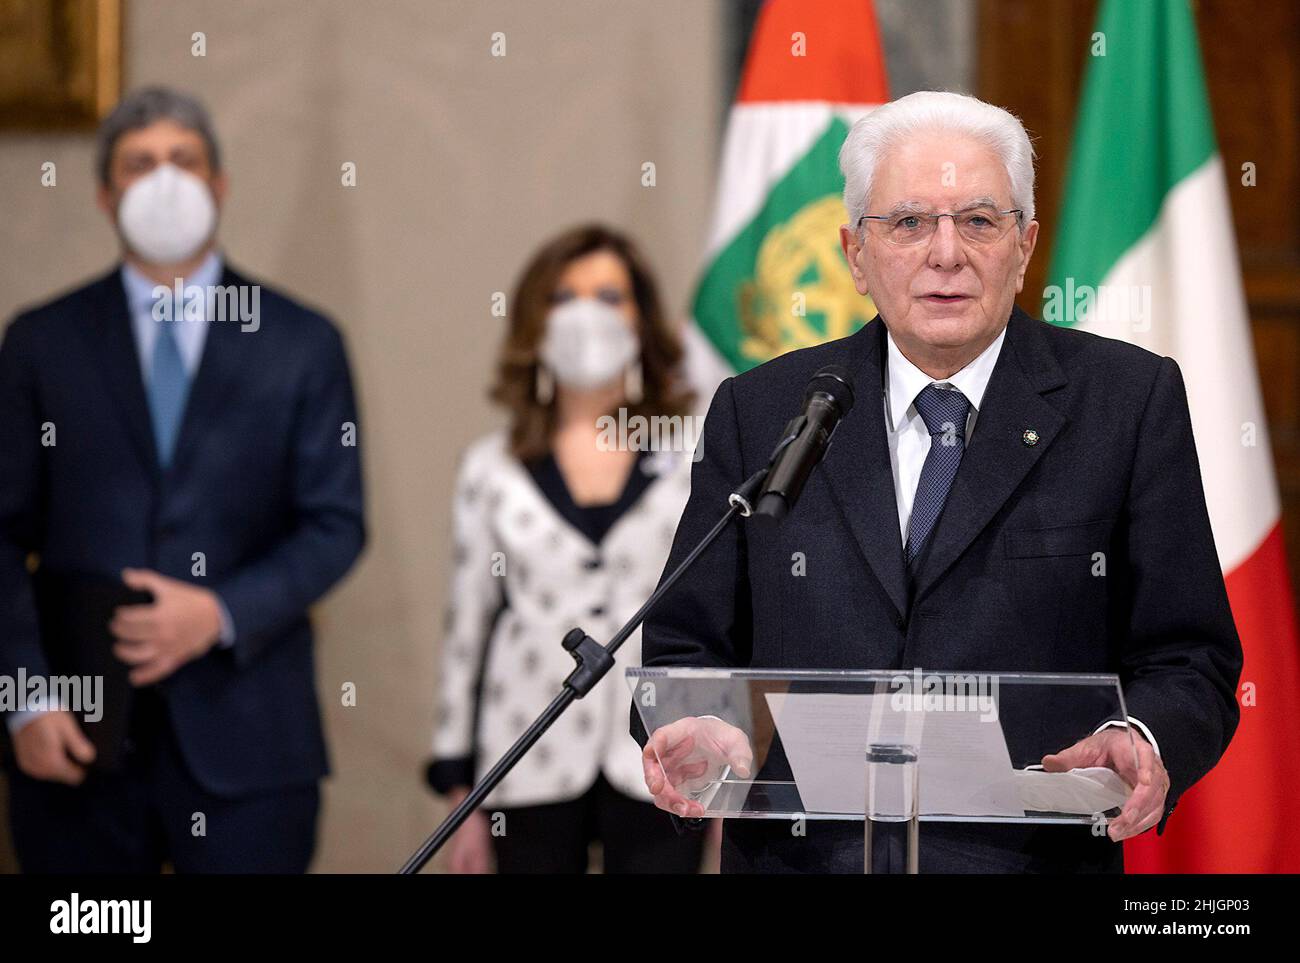 Rome, Italy. 29th Jan, 2022. Italian President Sergio Mattarella (Front) makes a declaration after receiving the official notice of his re-election at the Quirinale presidential palace in Rome, Italy, on Jan. 29, 2022. Italian President Sergio Mattarella was elected to a second term, Lower House Speaker Roberto Fico announced late Saturday, after the parliament gathered in a joint session and concluded its eighth round of voting. Credit: Str/Xinhua/Alamy Live News Stock Photo